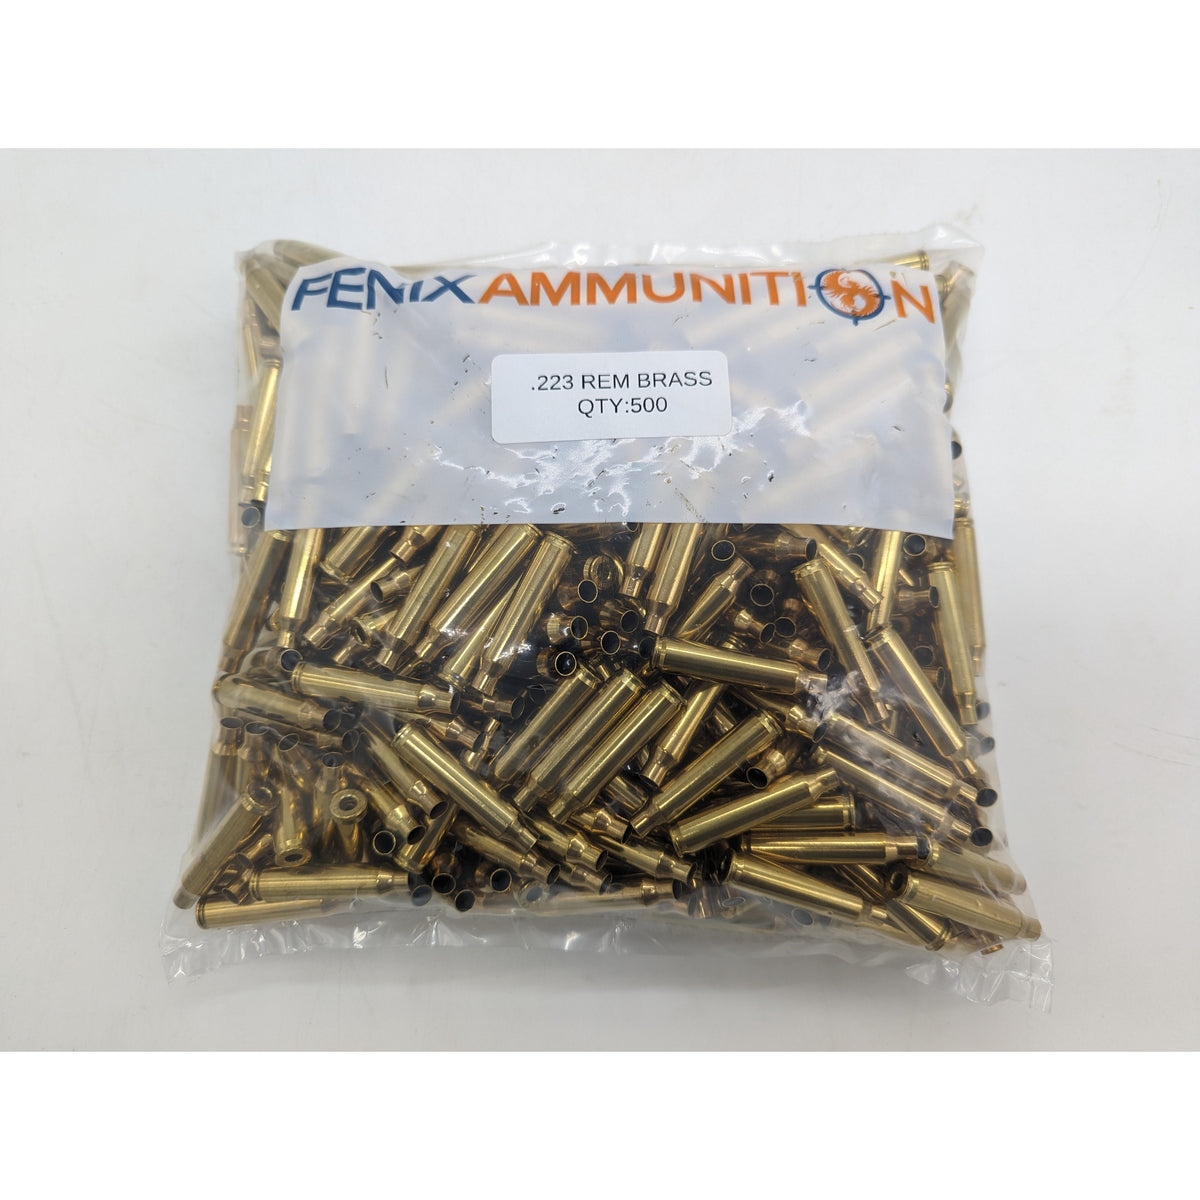 Processed and Primed 223 Brass for reloading